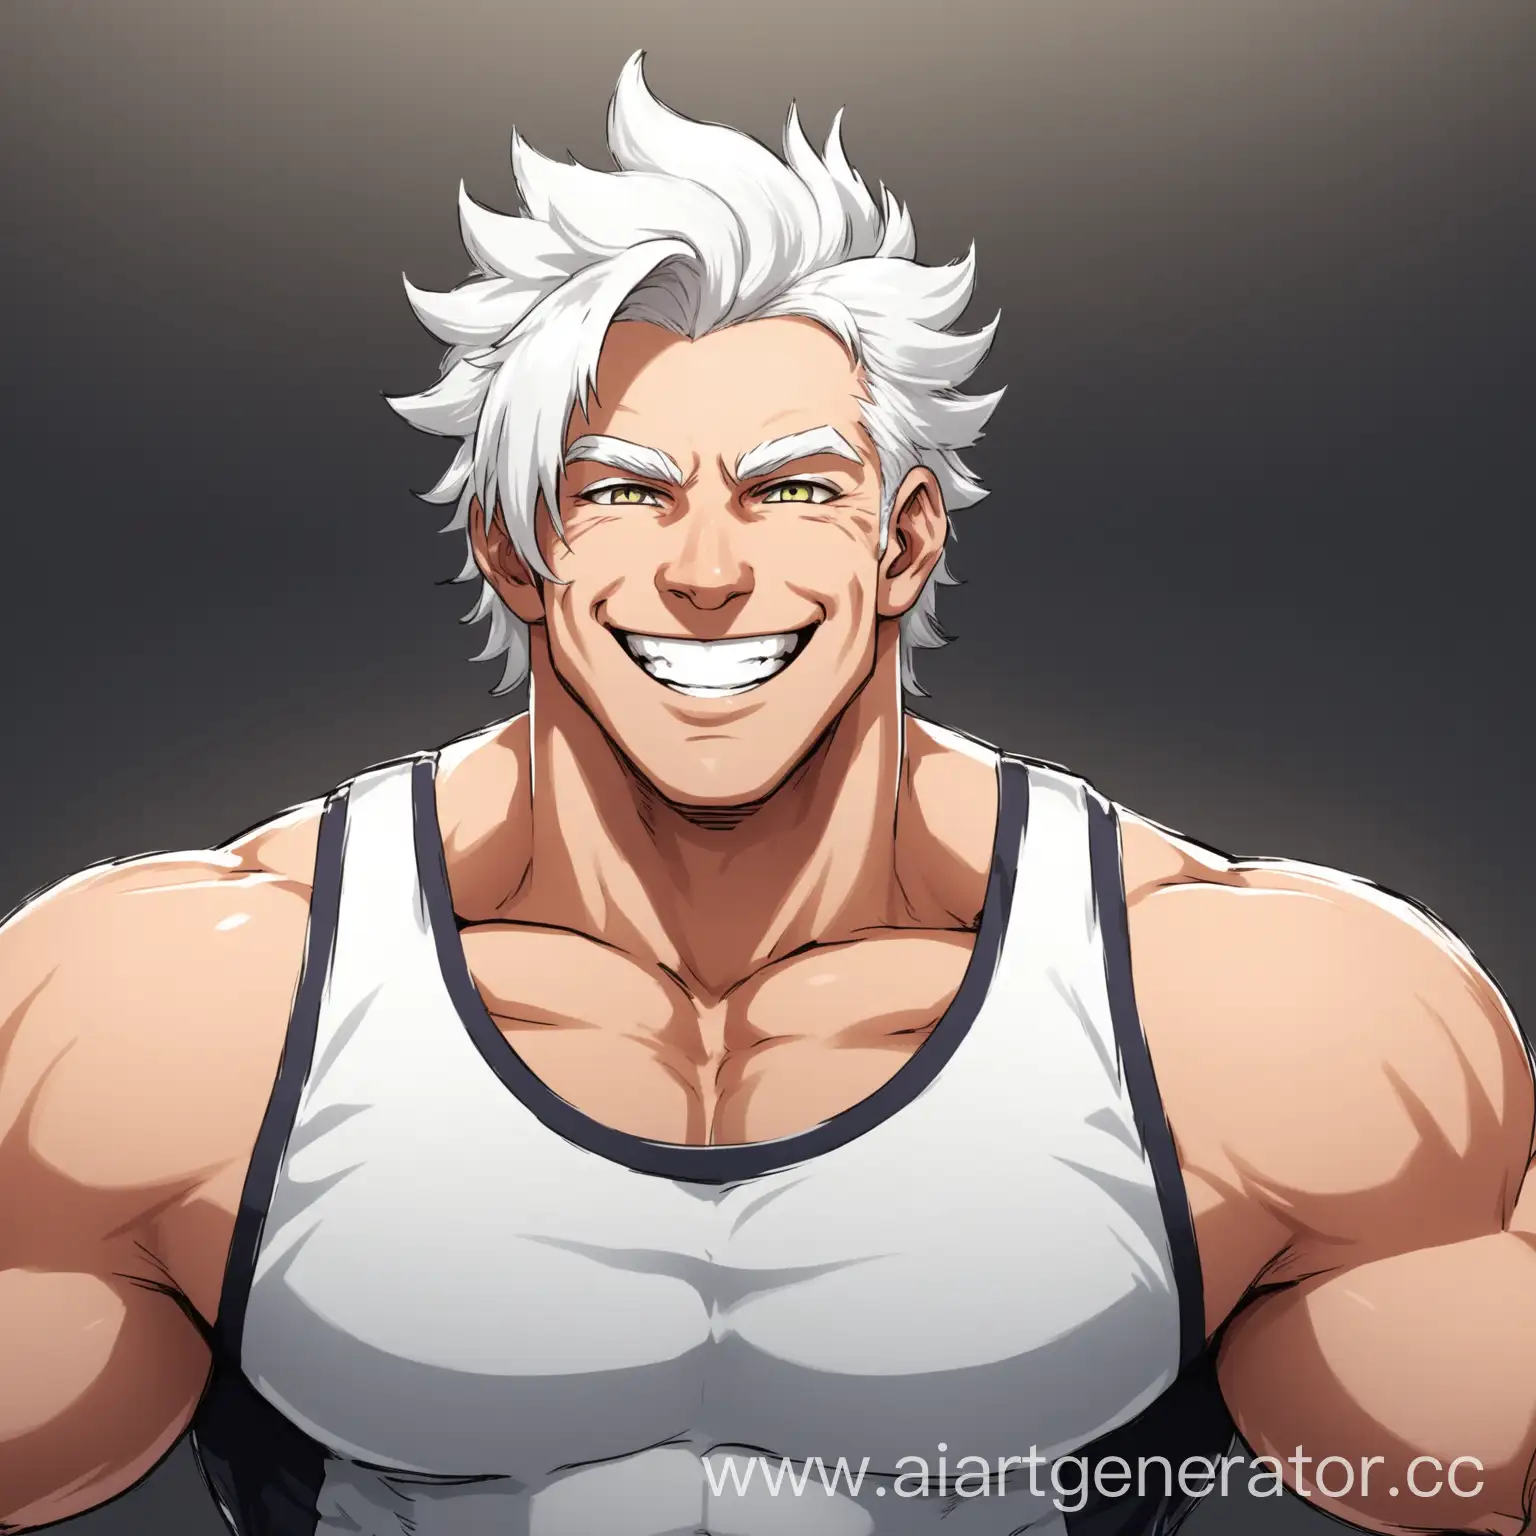 a white-haired, pumped-up man smile proudly full of confidence